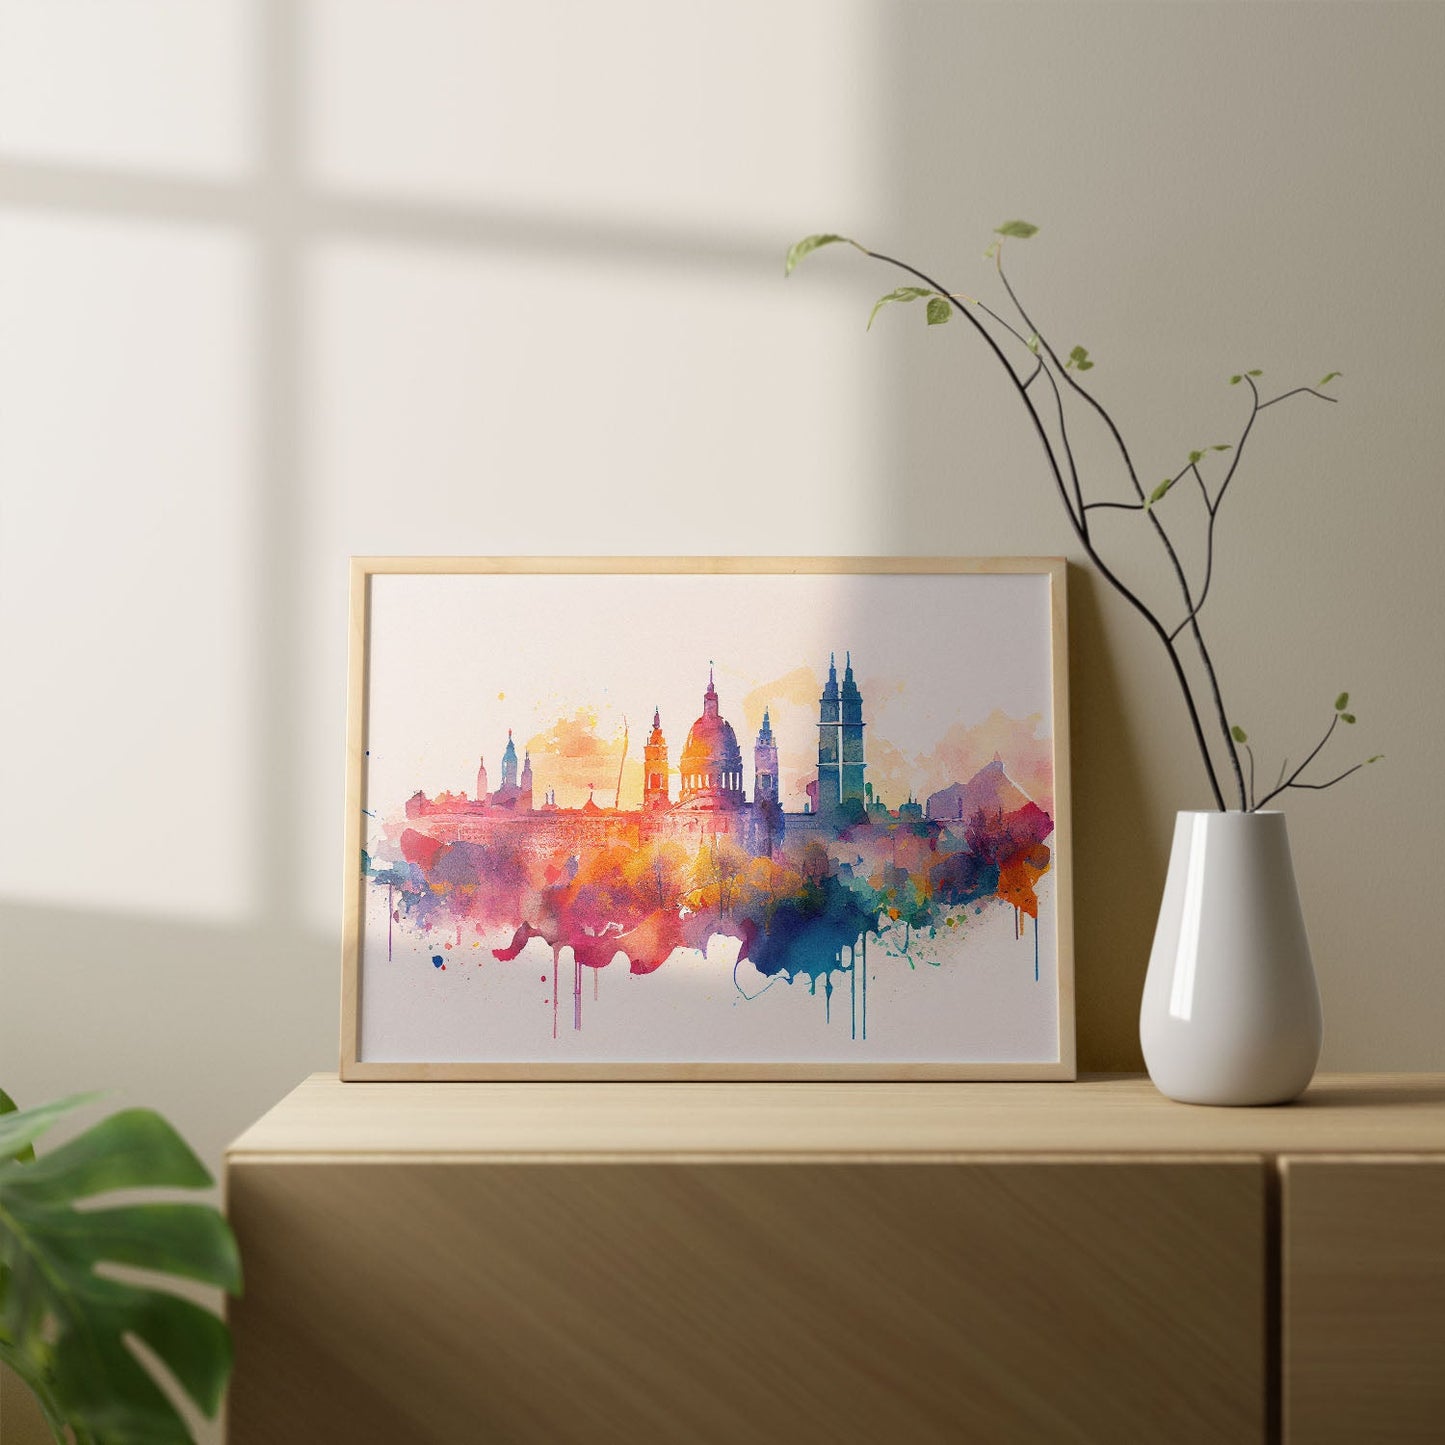 Nacnic watercolor of a skyline of the city of Madrid_4. Aesthetic Wall Art Prints for Bedroom or Living Room Design.